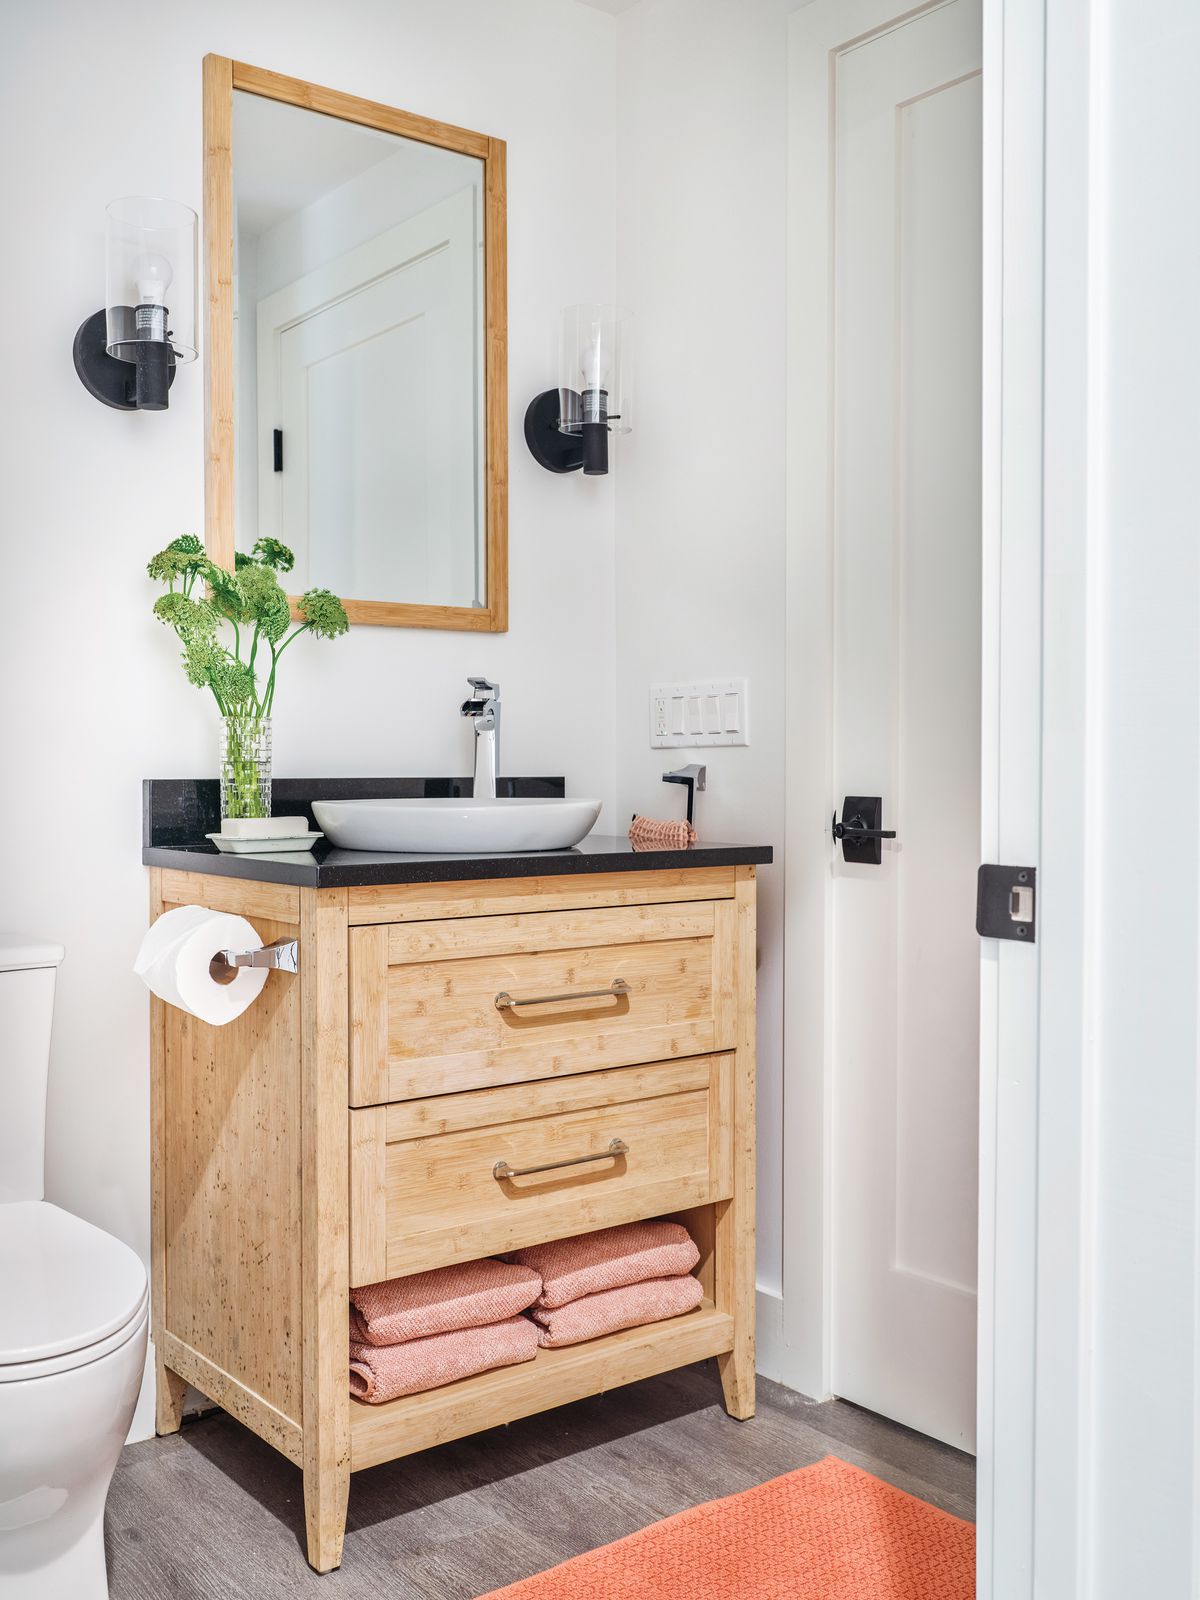 Bathroom furniture with wall sconces on the sides of the mirror